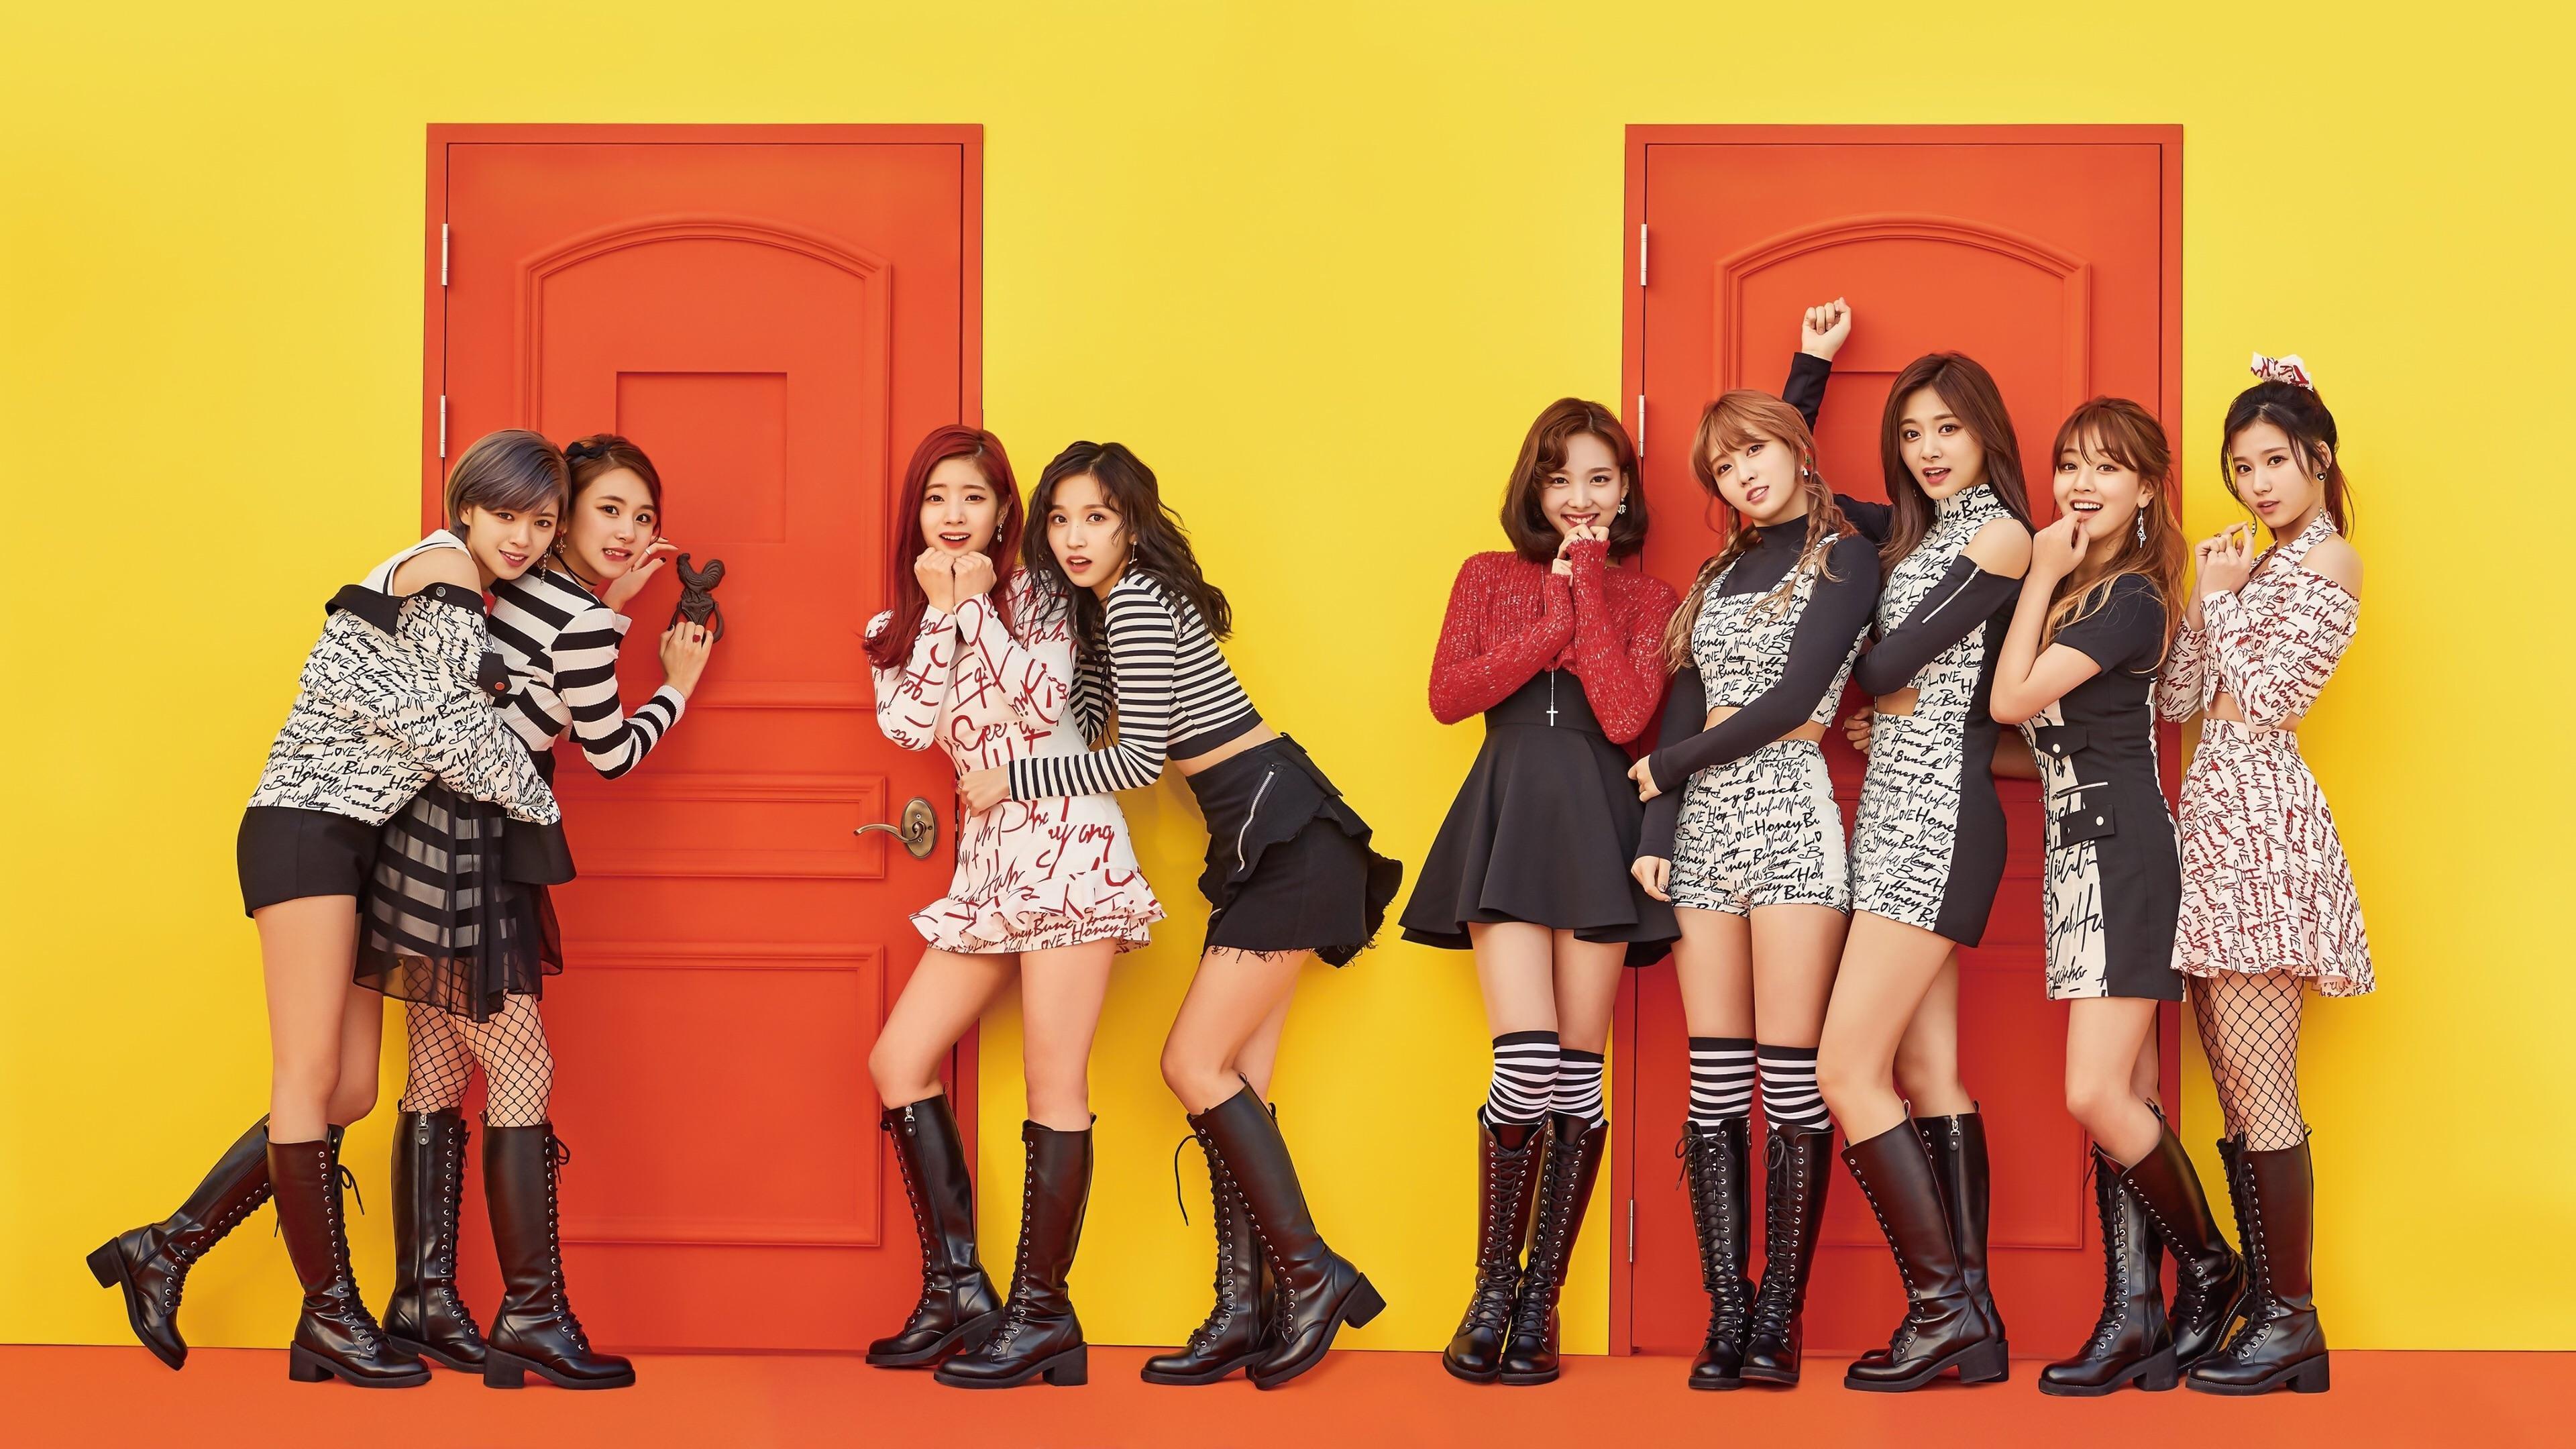 Cute Girls From the Girl Group TWICE 4K wallpaper